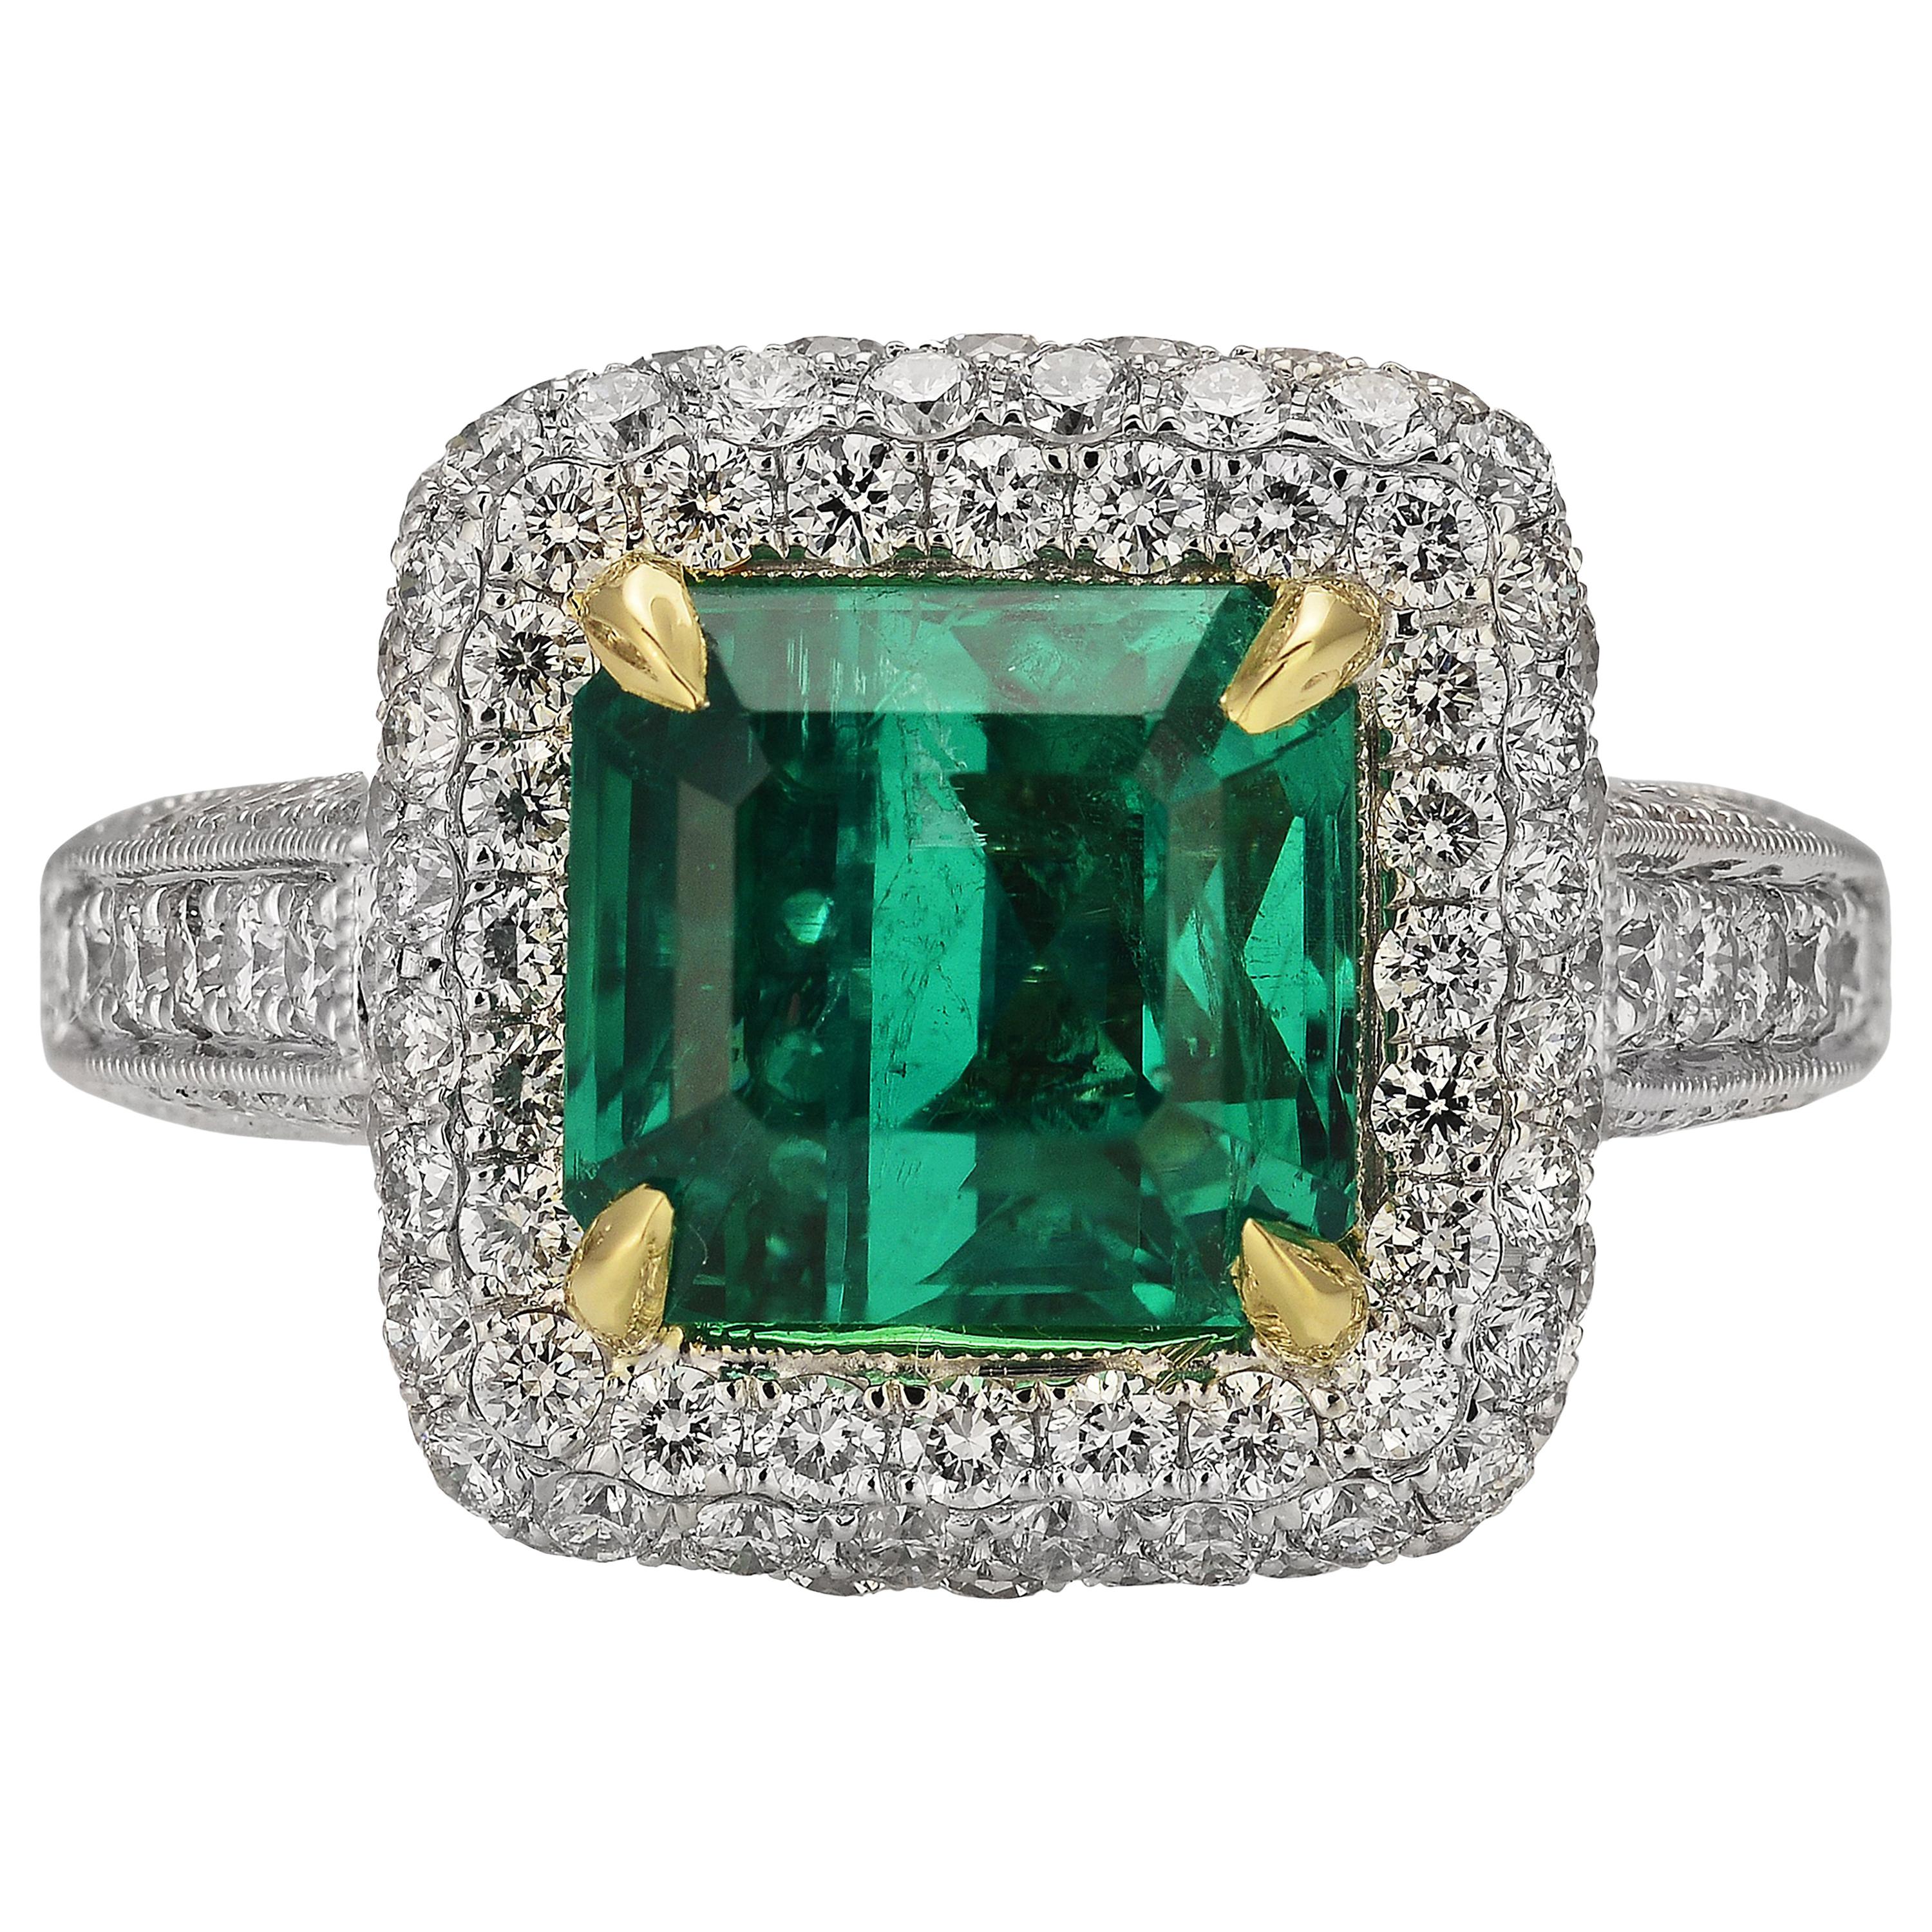 3.13 Carat Colombian Emerald Cocktail Ring